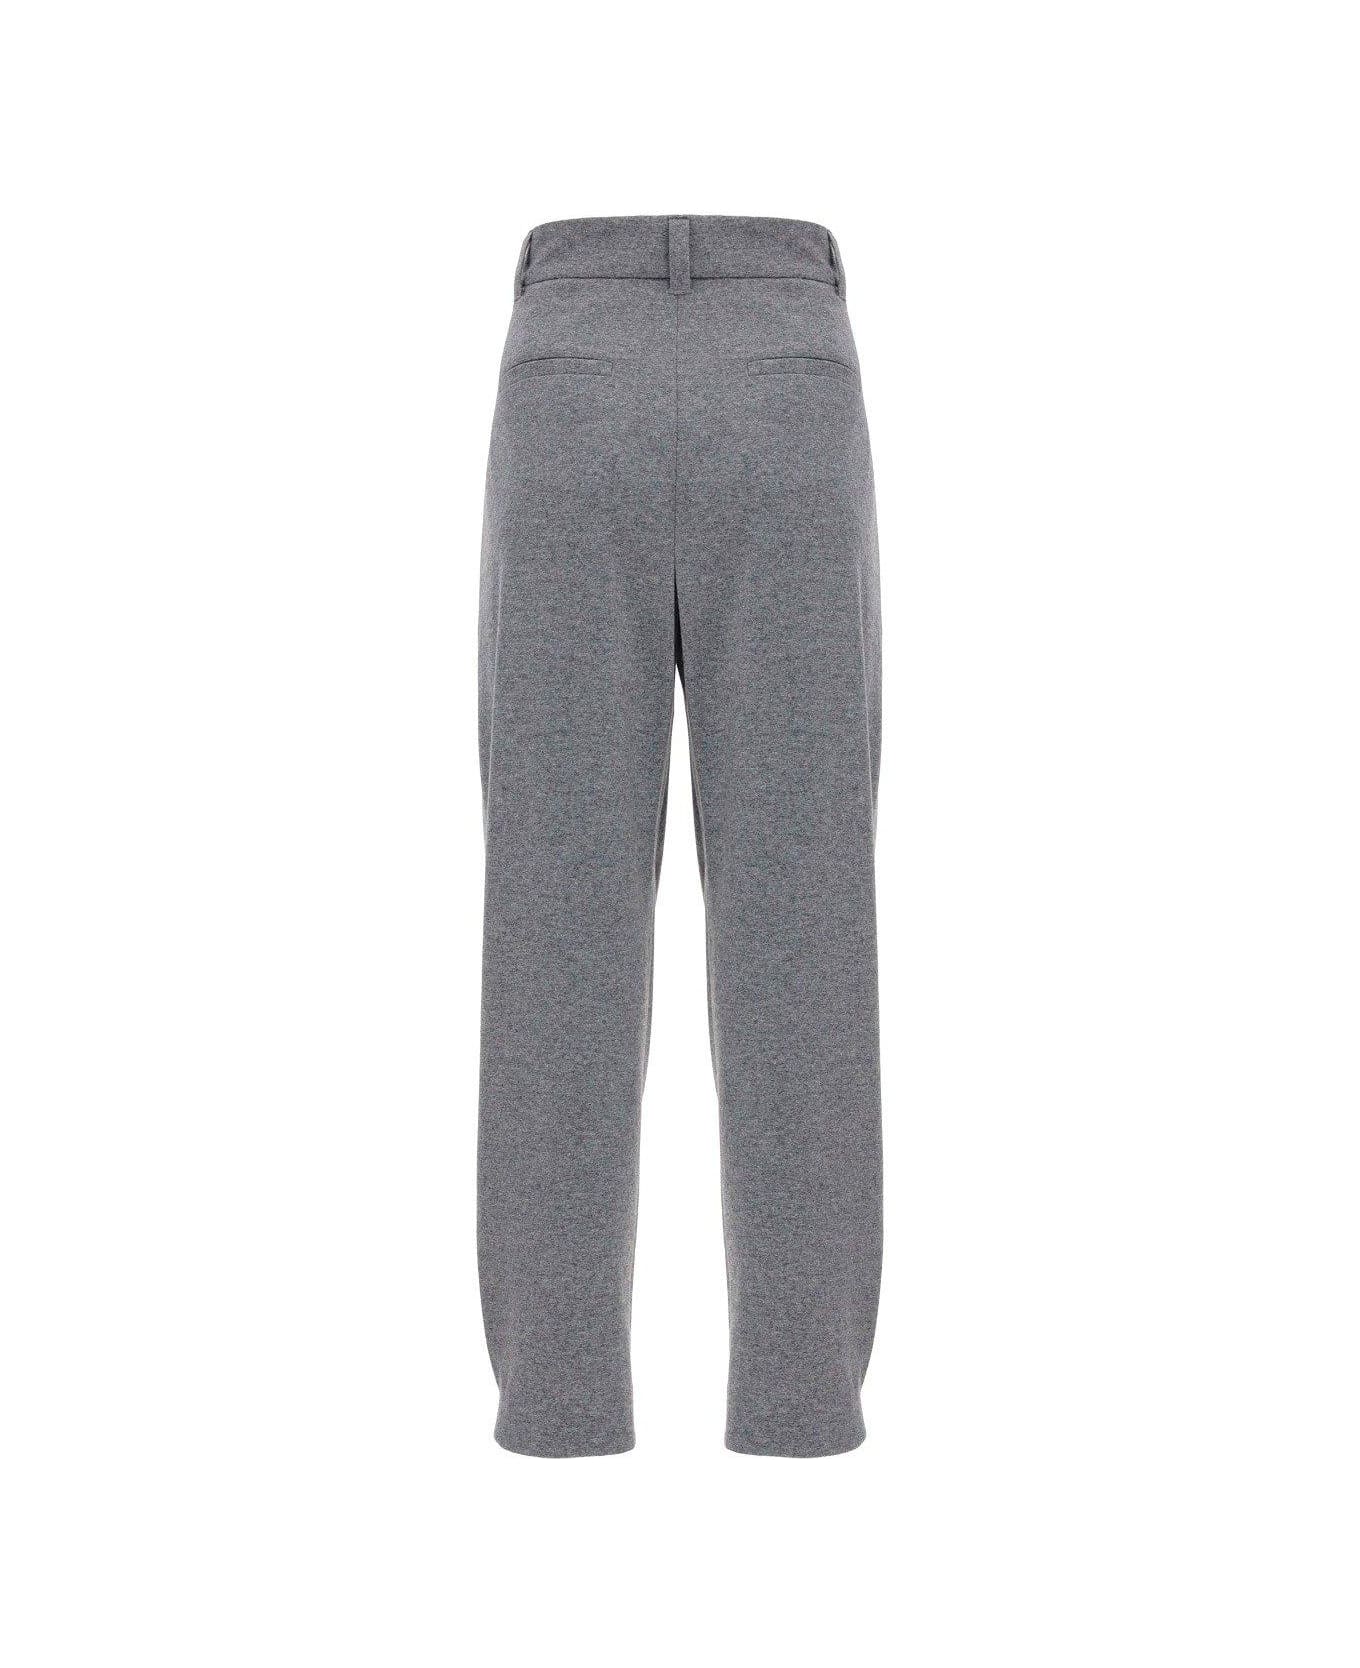 Brunello Cucinelli Tapered Pants - Grey ボトムス